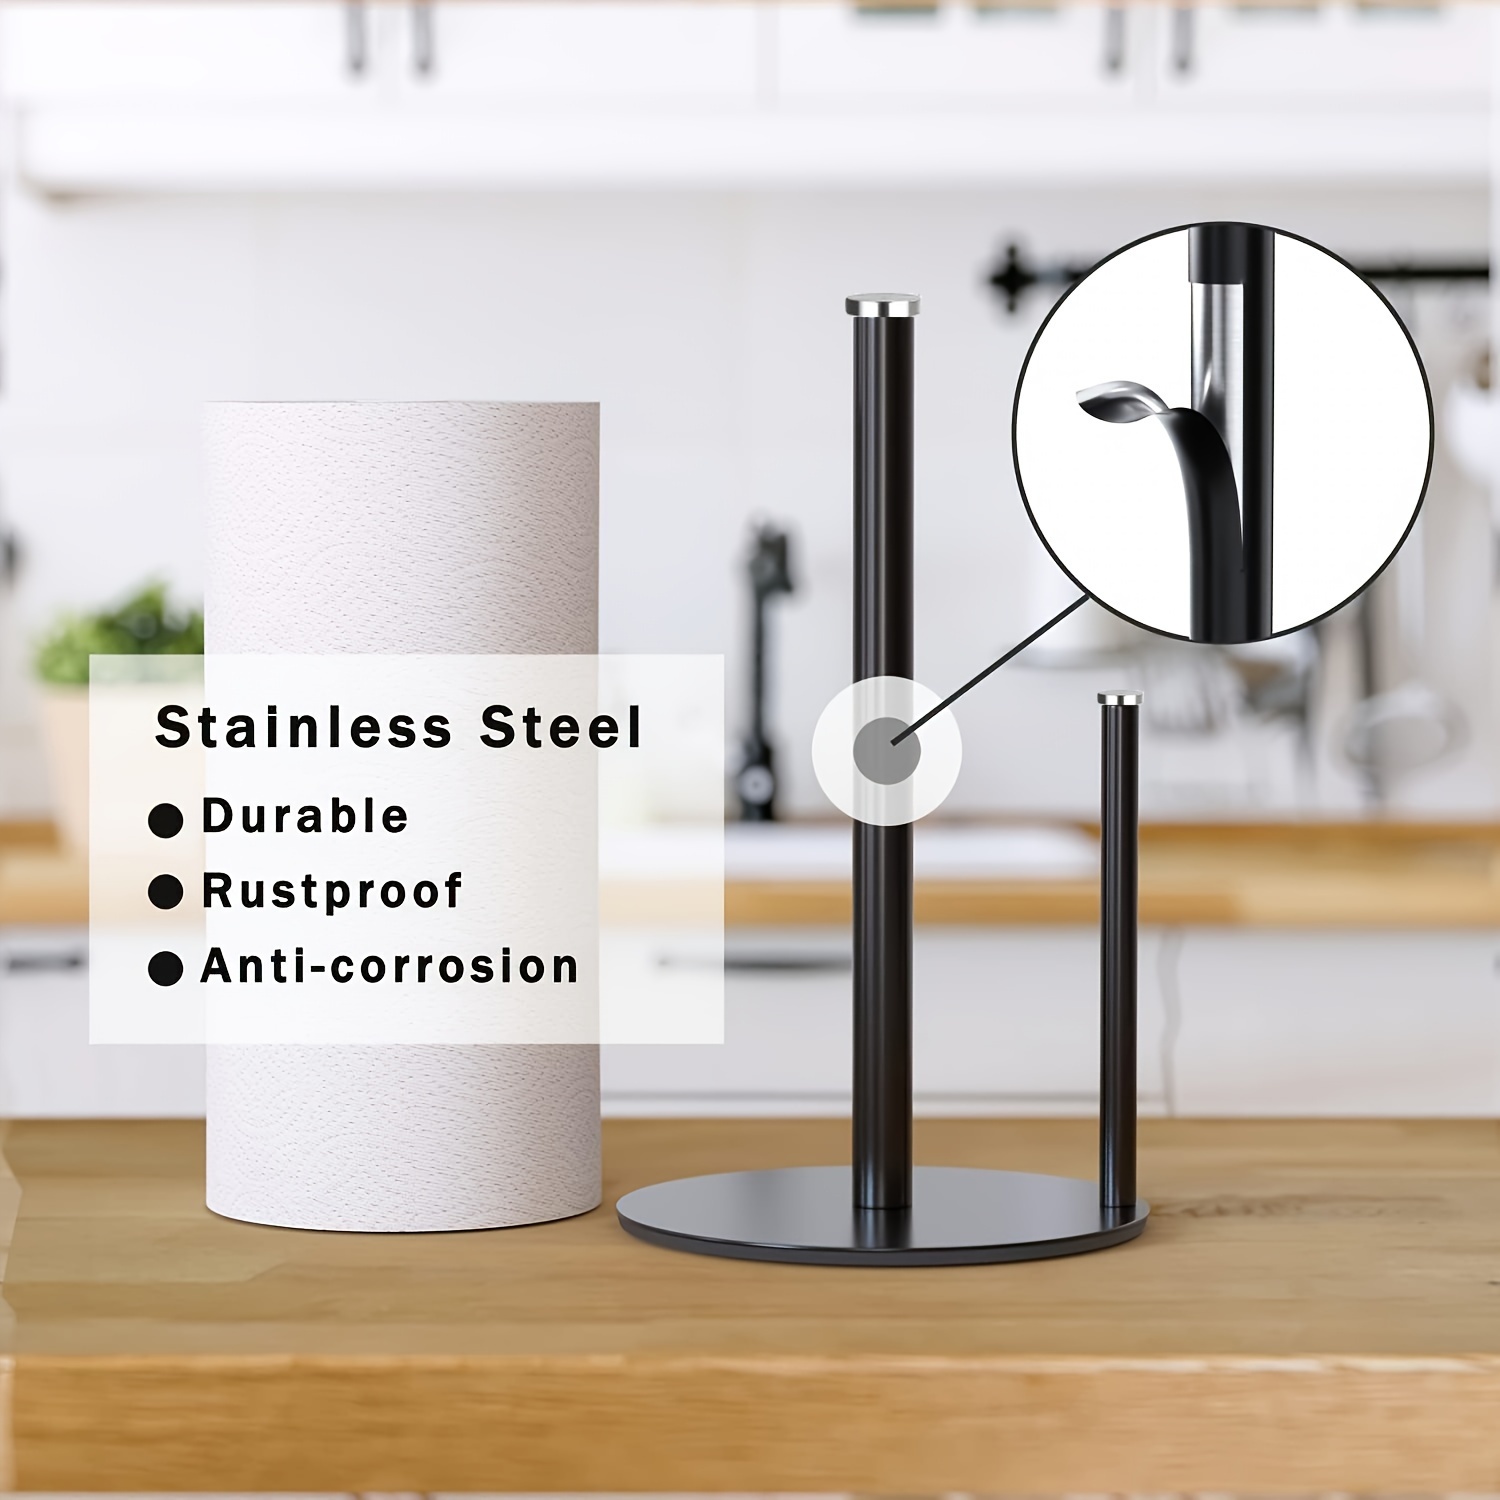 

1pc Stainless Steel Paper Towel Holder, Durable Rustproof Anti-corrosion, Vertical Kitchen Roll Stand With Dual Rod, Black Tabletop Dispenser